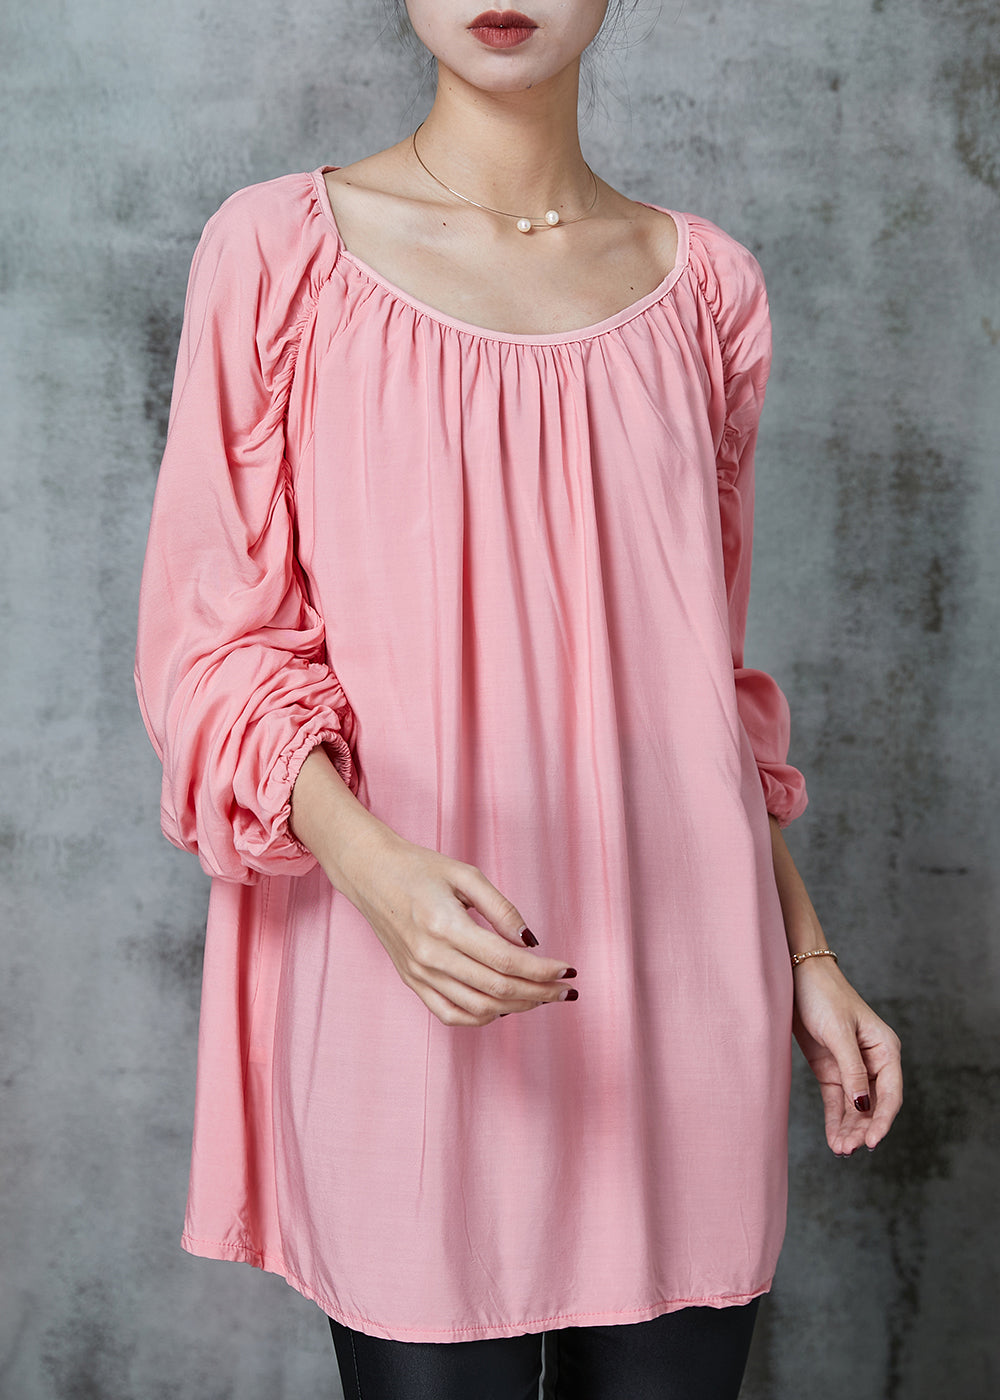 Classy Pink Oversized Wrinkled Cotton Shirt Spring